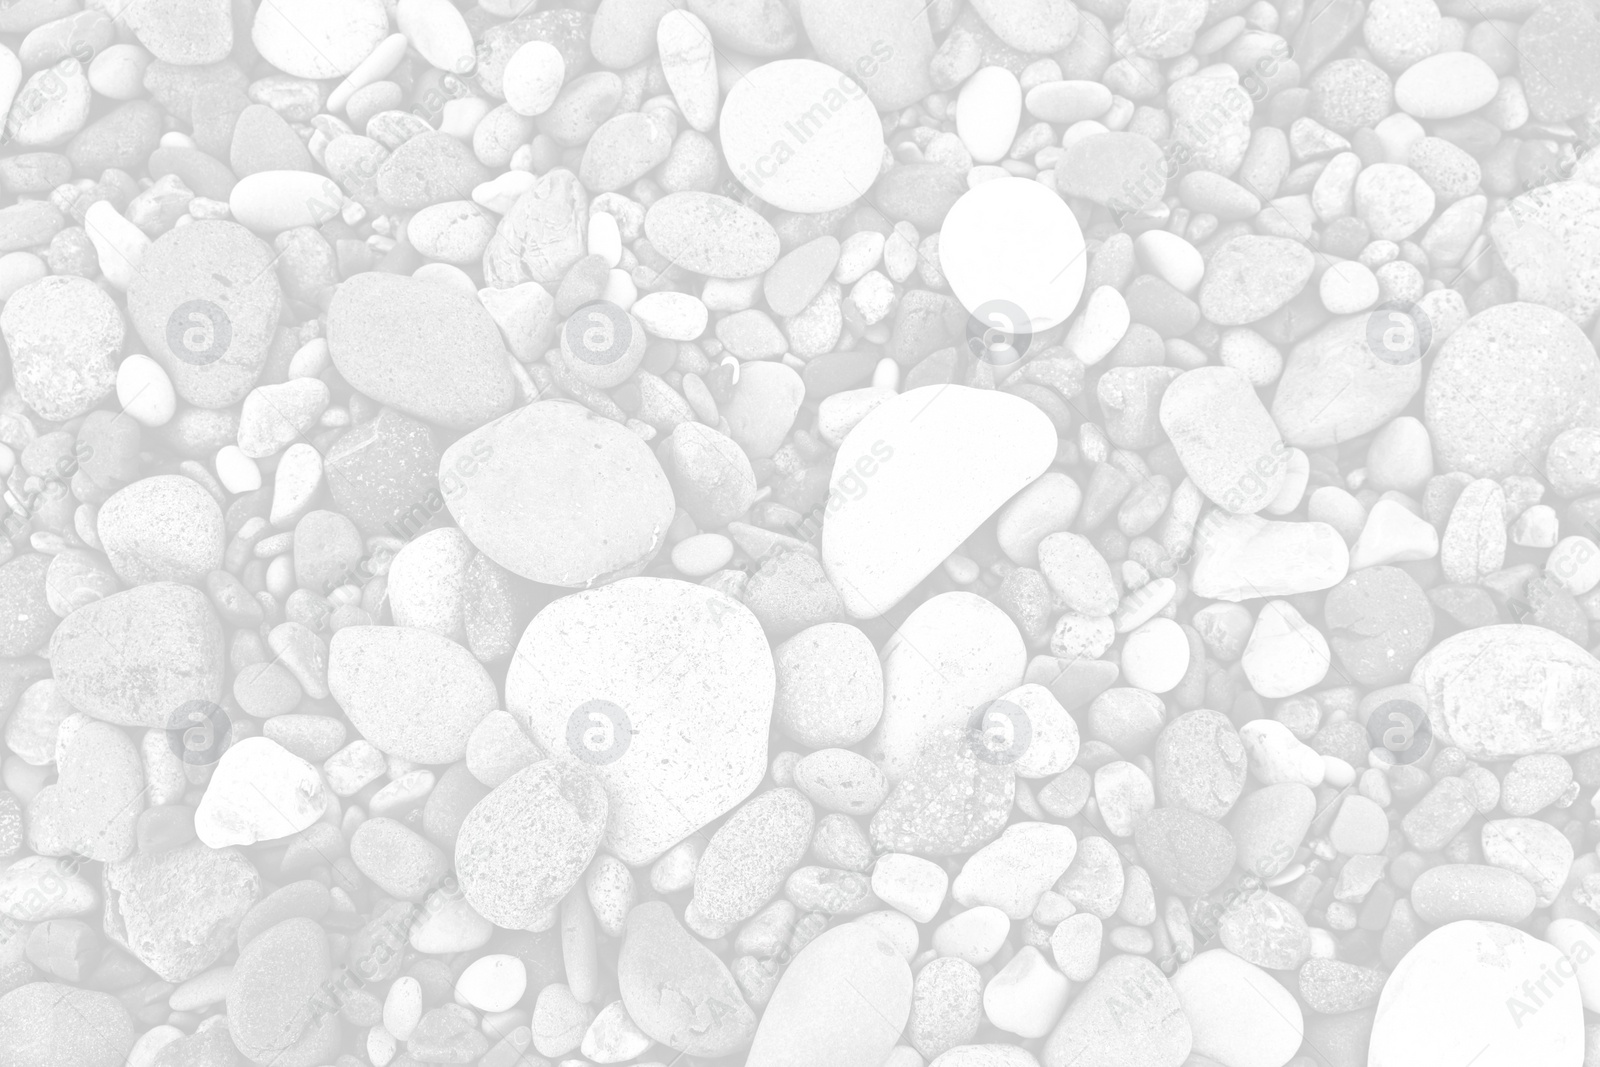 Image of Many different pebbles as background, top view. Black and white effect